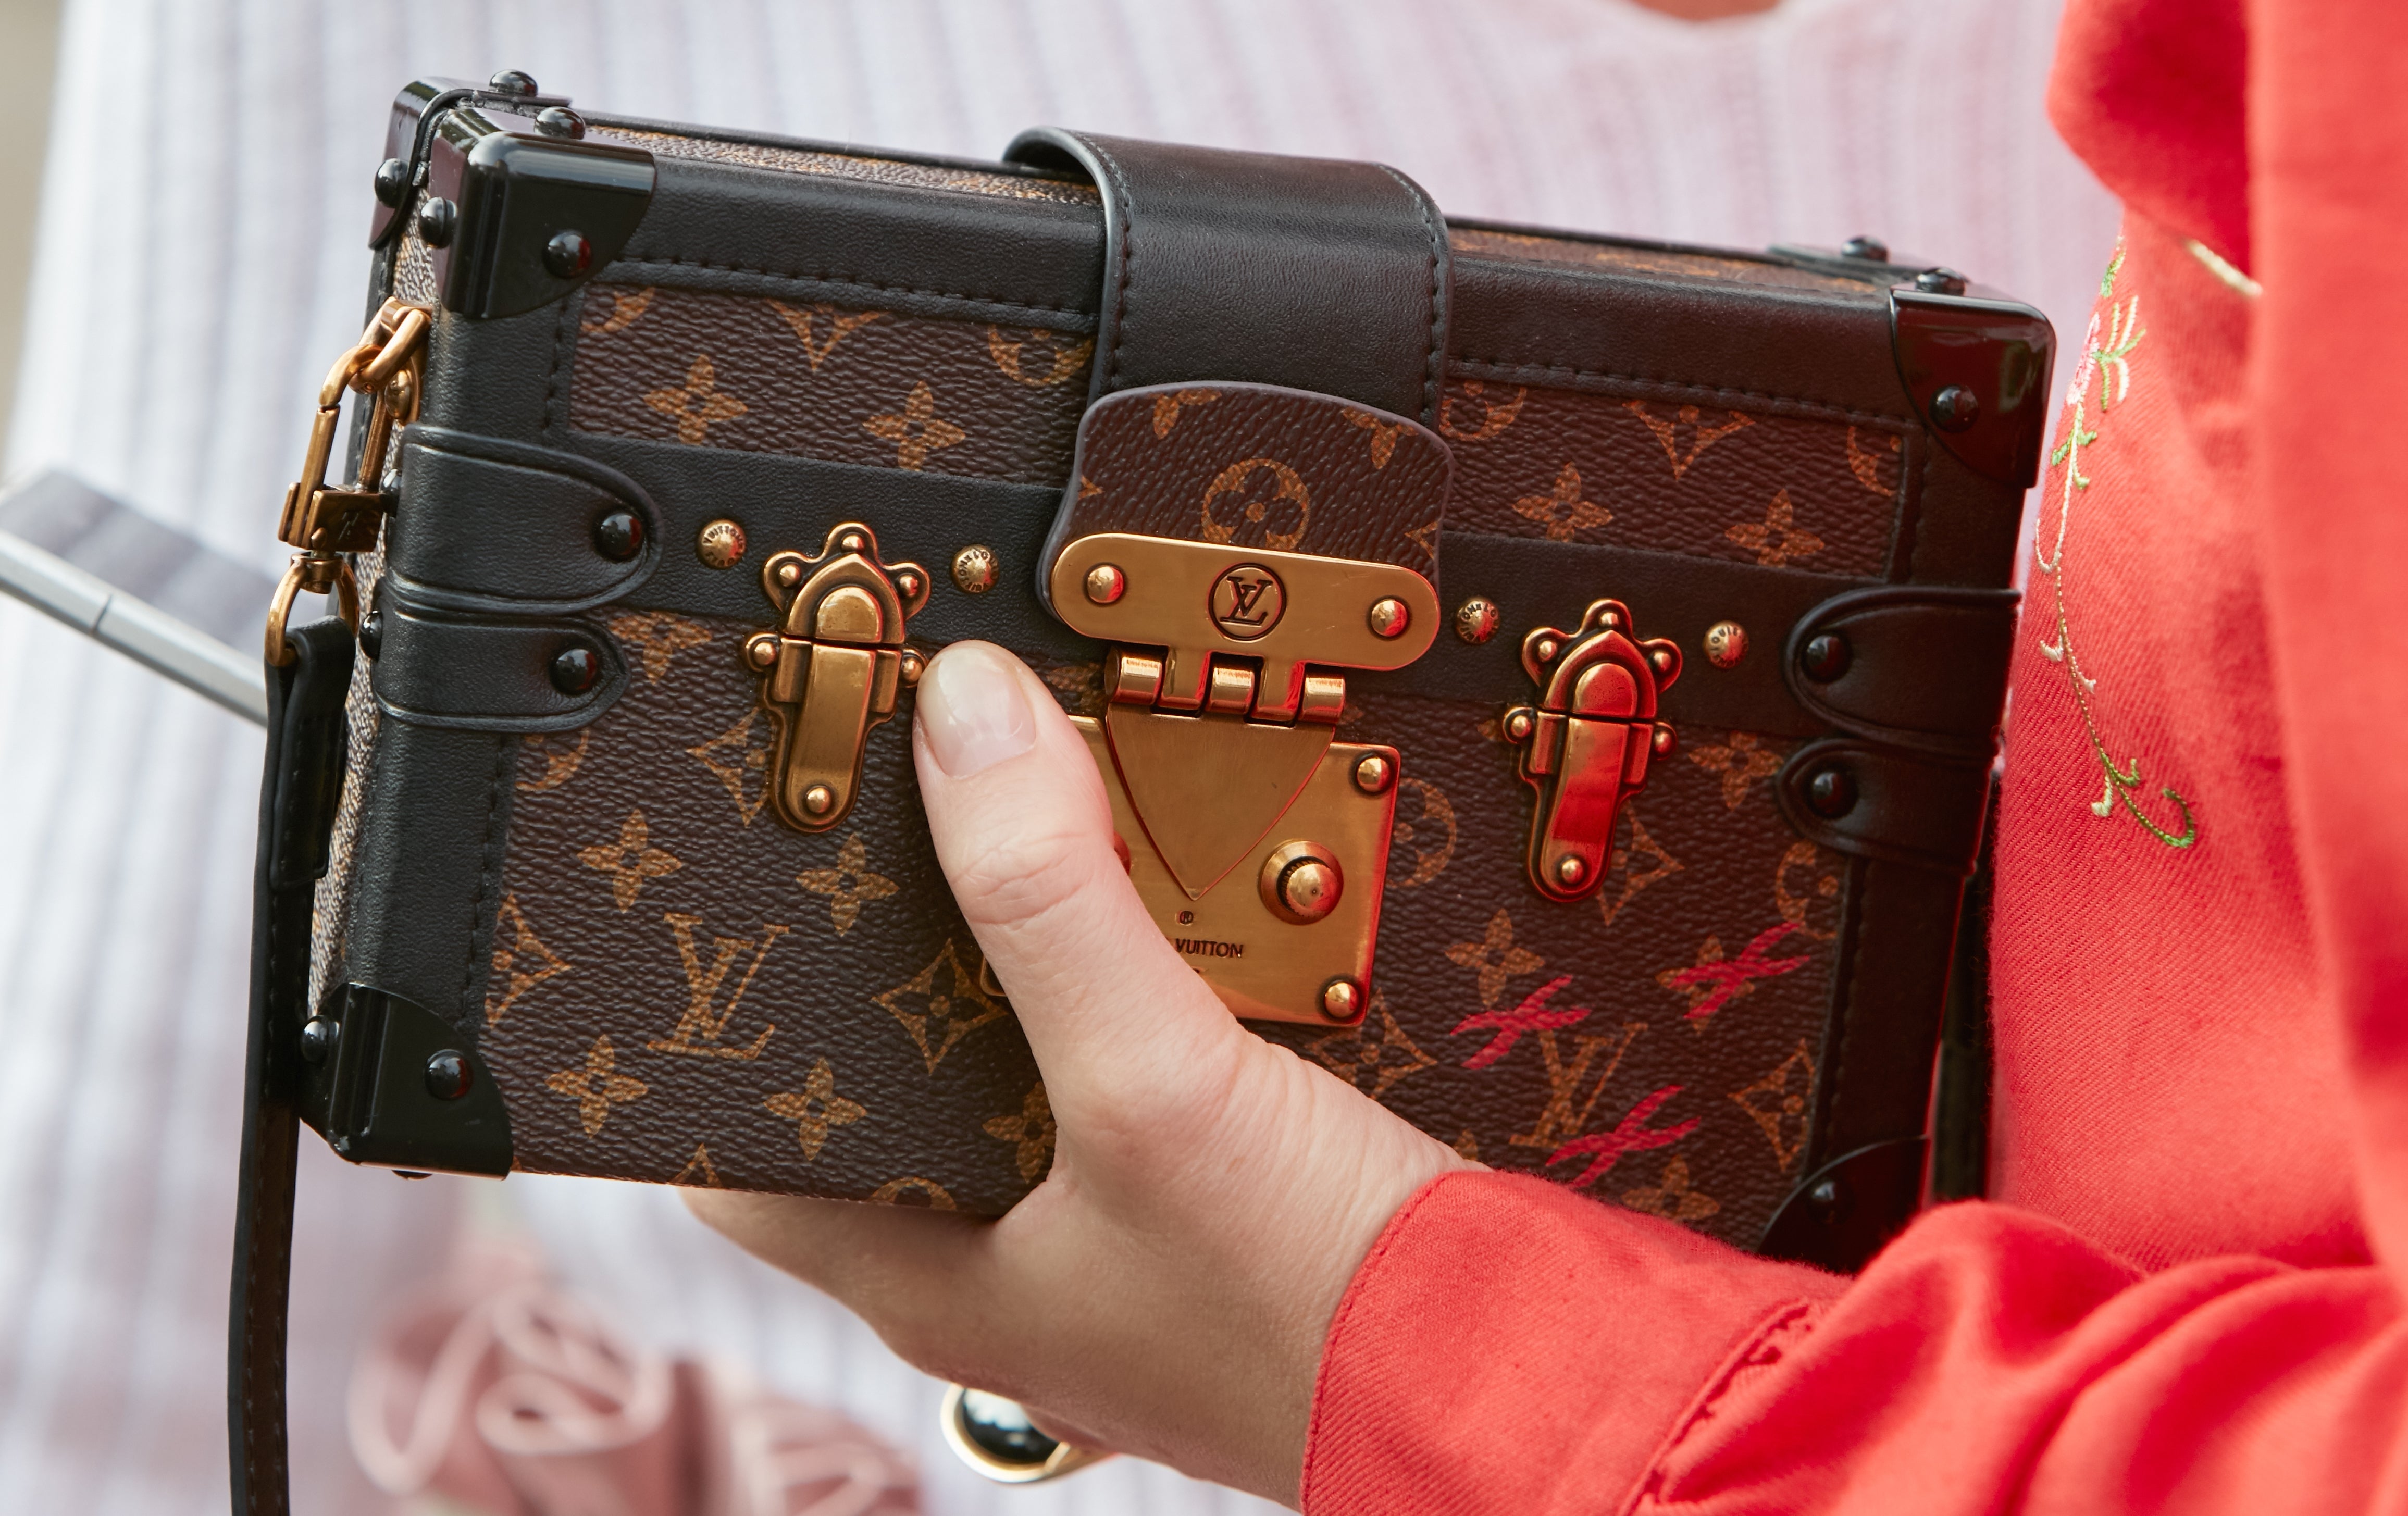 Louis Vuitton Date Code Checker + What do they mean and how to find it